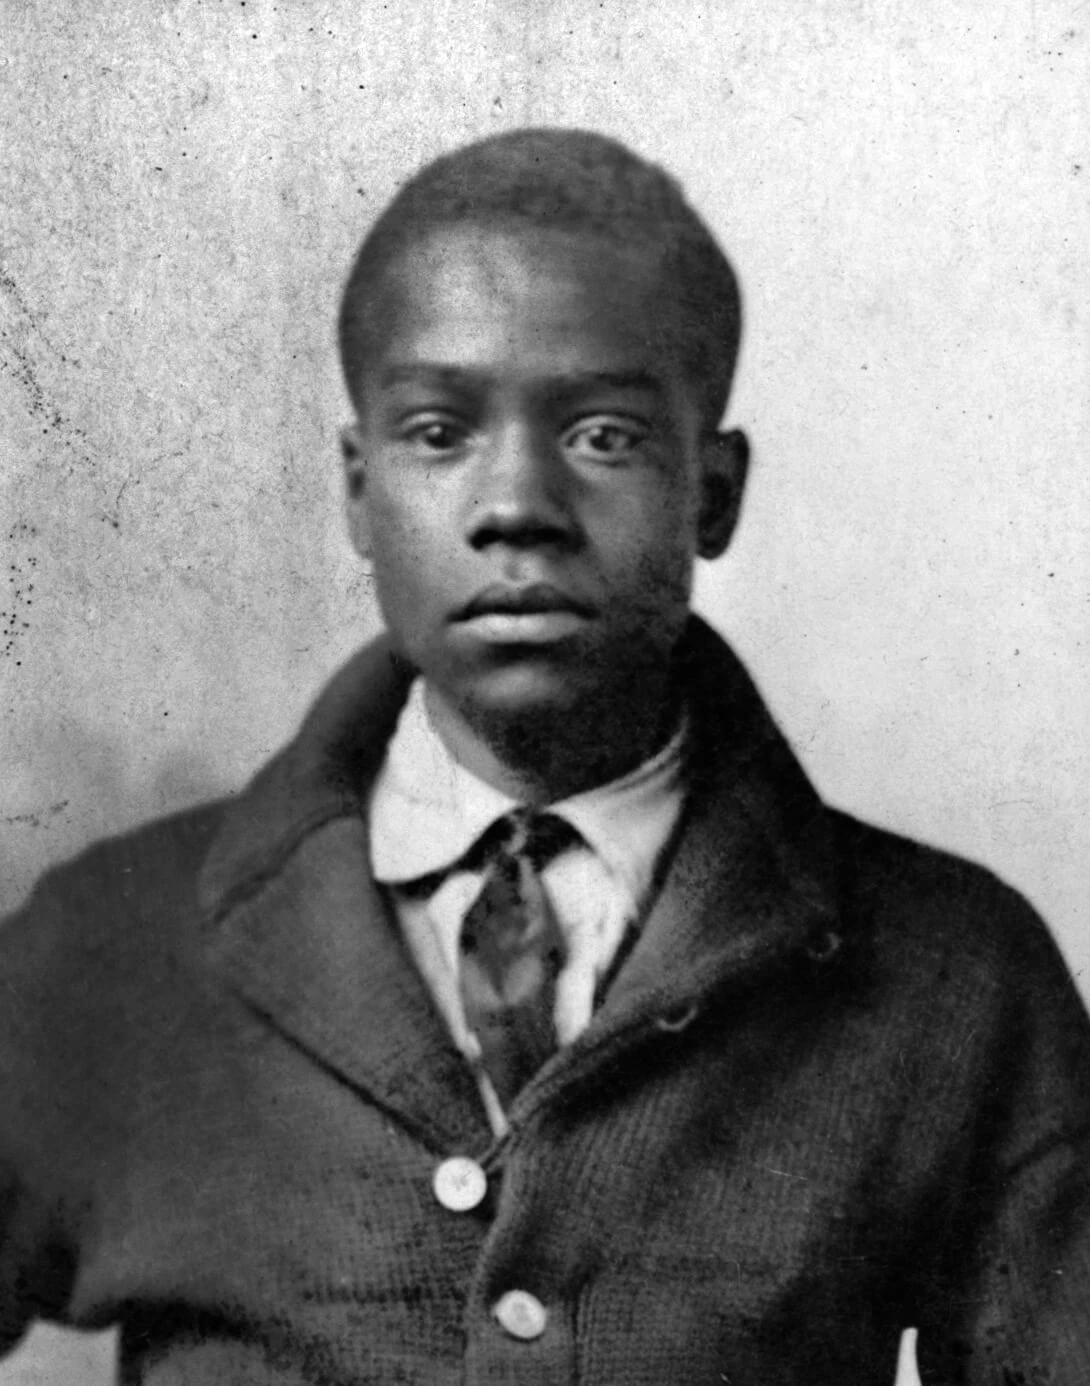 Black and white portrait of a Black man in a white shirt, tie and dark jacket.